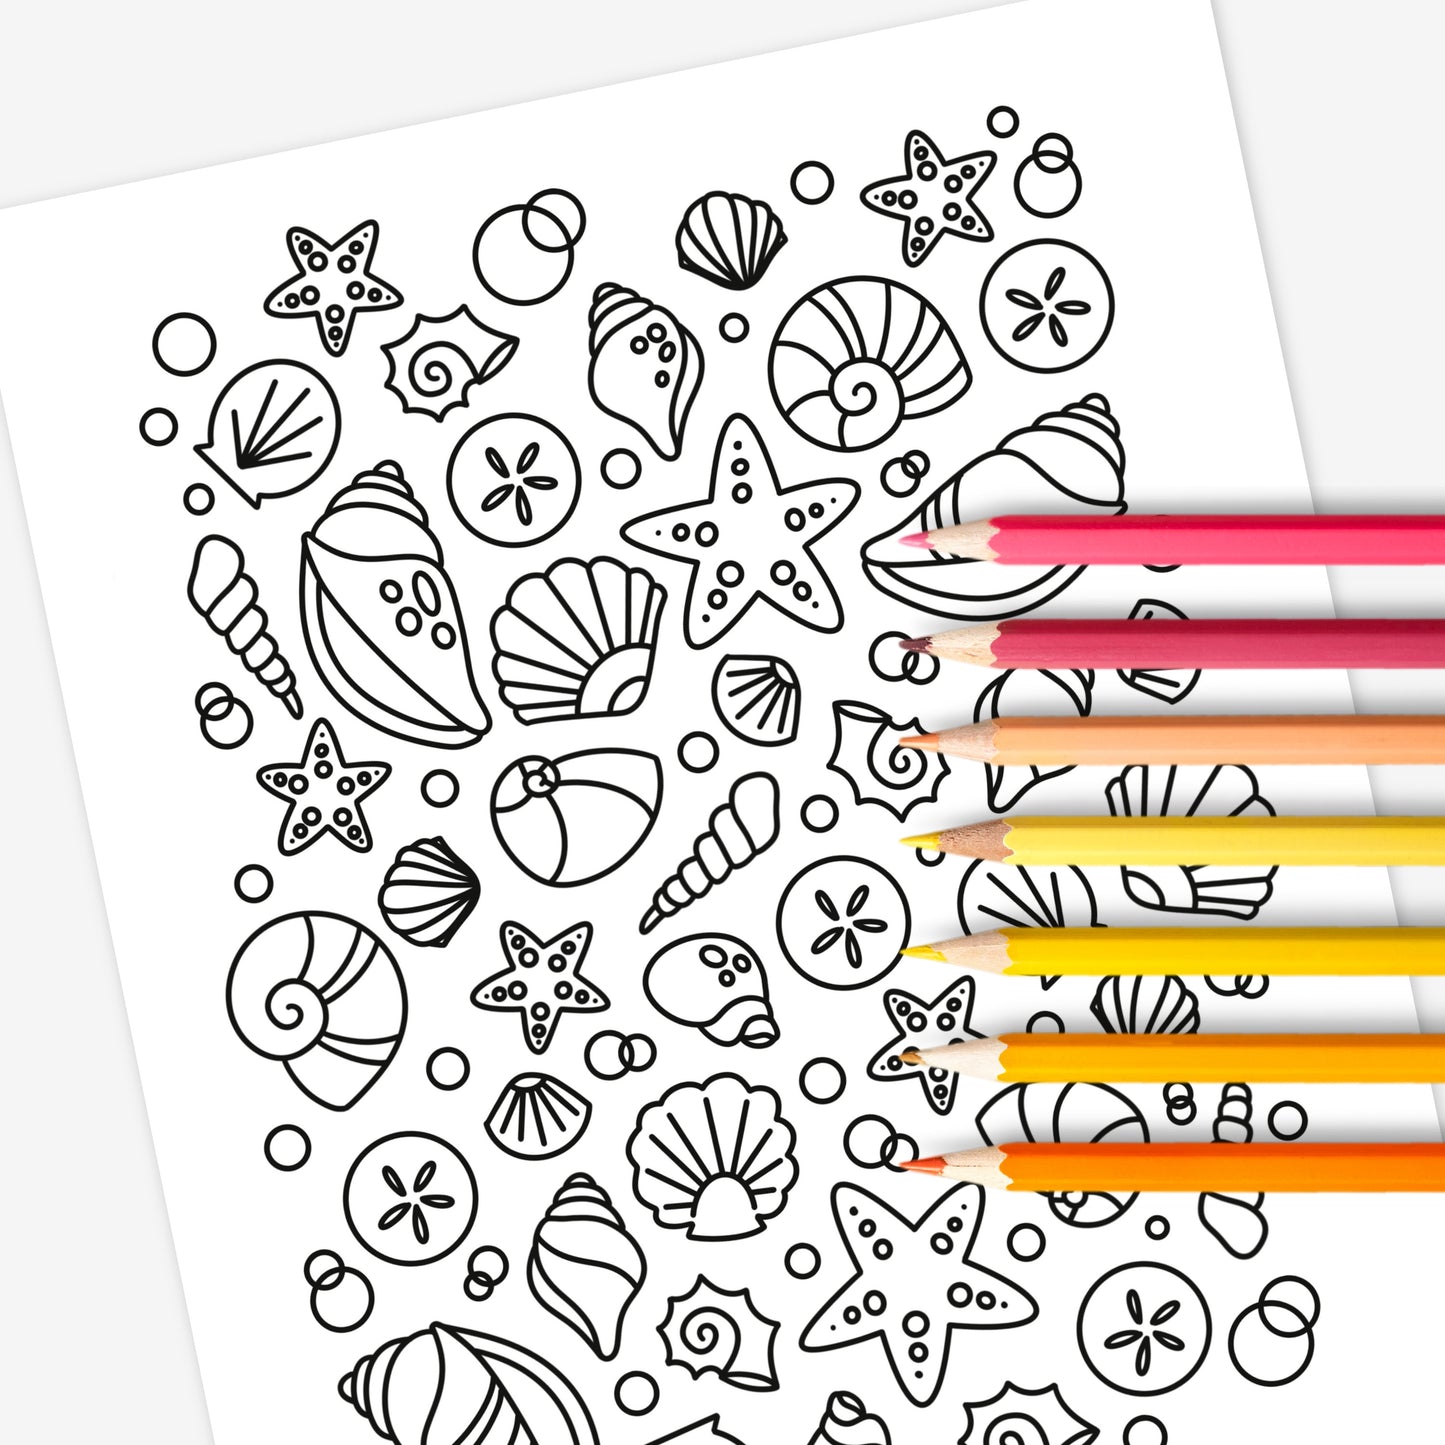 10 Pk Beach Vacation Printable Coloring Pages | Hand Illustrated Ocean Tropical Travel Summer Themed